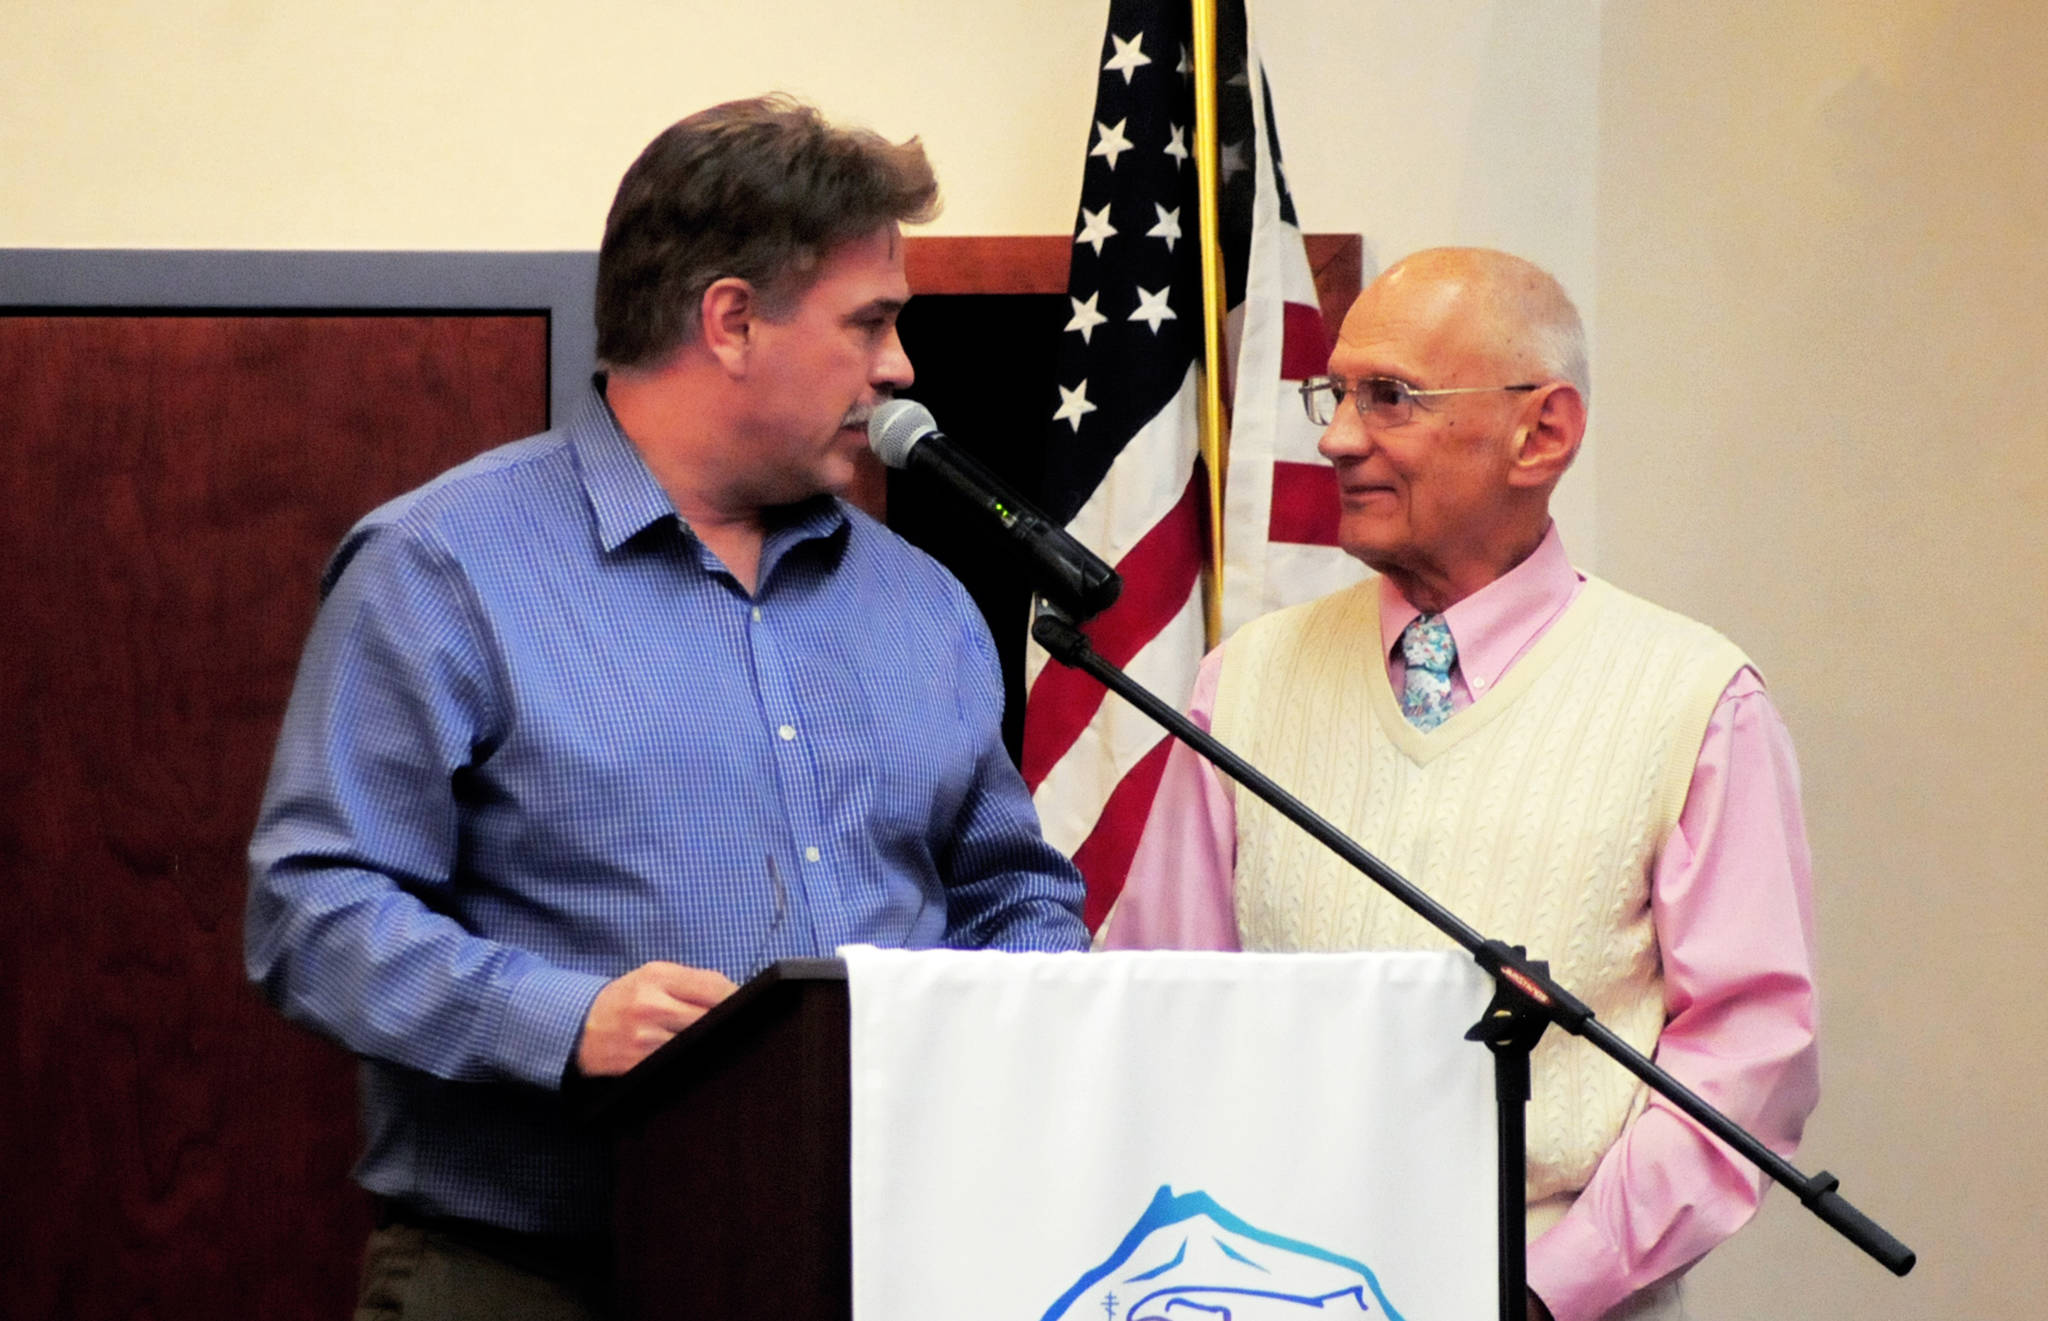 Kenai Mayor Brian Gabriel (left) talks with Dr. Peter Hansen (right) a retirement party for Hansen hosted by Peninsula Community Health Services at the Kenai Visitors and Cultural Center on Thursday, March 29, 2018 in Kenai, Alaska. Hansen arrived in Kenai in 1967 and has practiced family medicine since in private practice, with Central Peninsula Hospital and with Peninsula Community Health Services. He plans to retire but to stay in the community and work on a book about his experiences. (Photo by Elizabeth Earl/Peninsula Clarion)